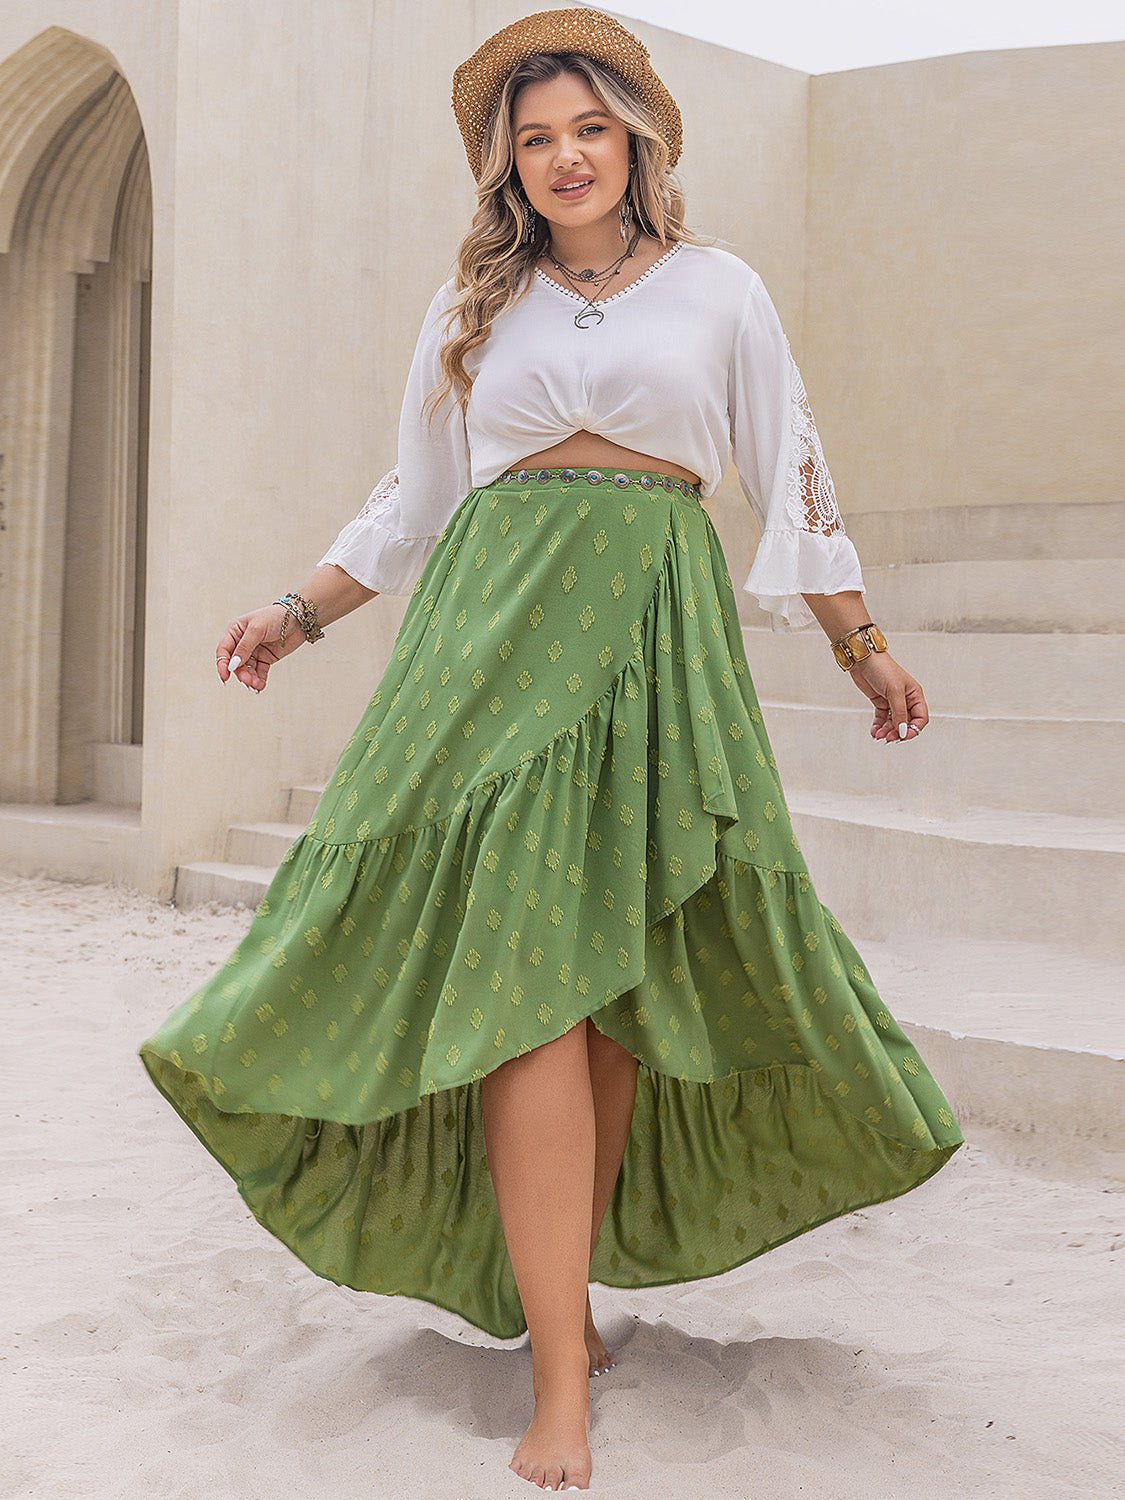 Plus Size High-Low Maxi Skirt in Matcha GreenMaxi SkirtBeach Rose Co.